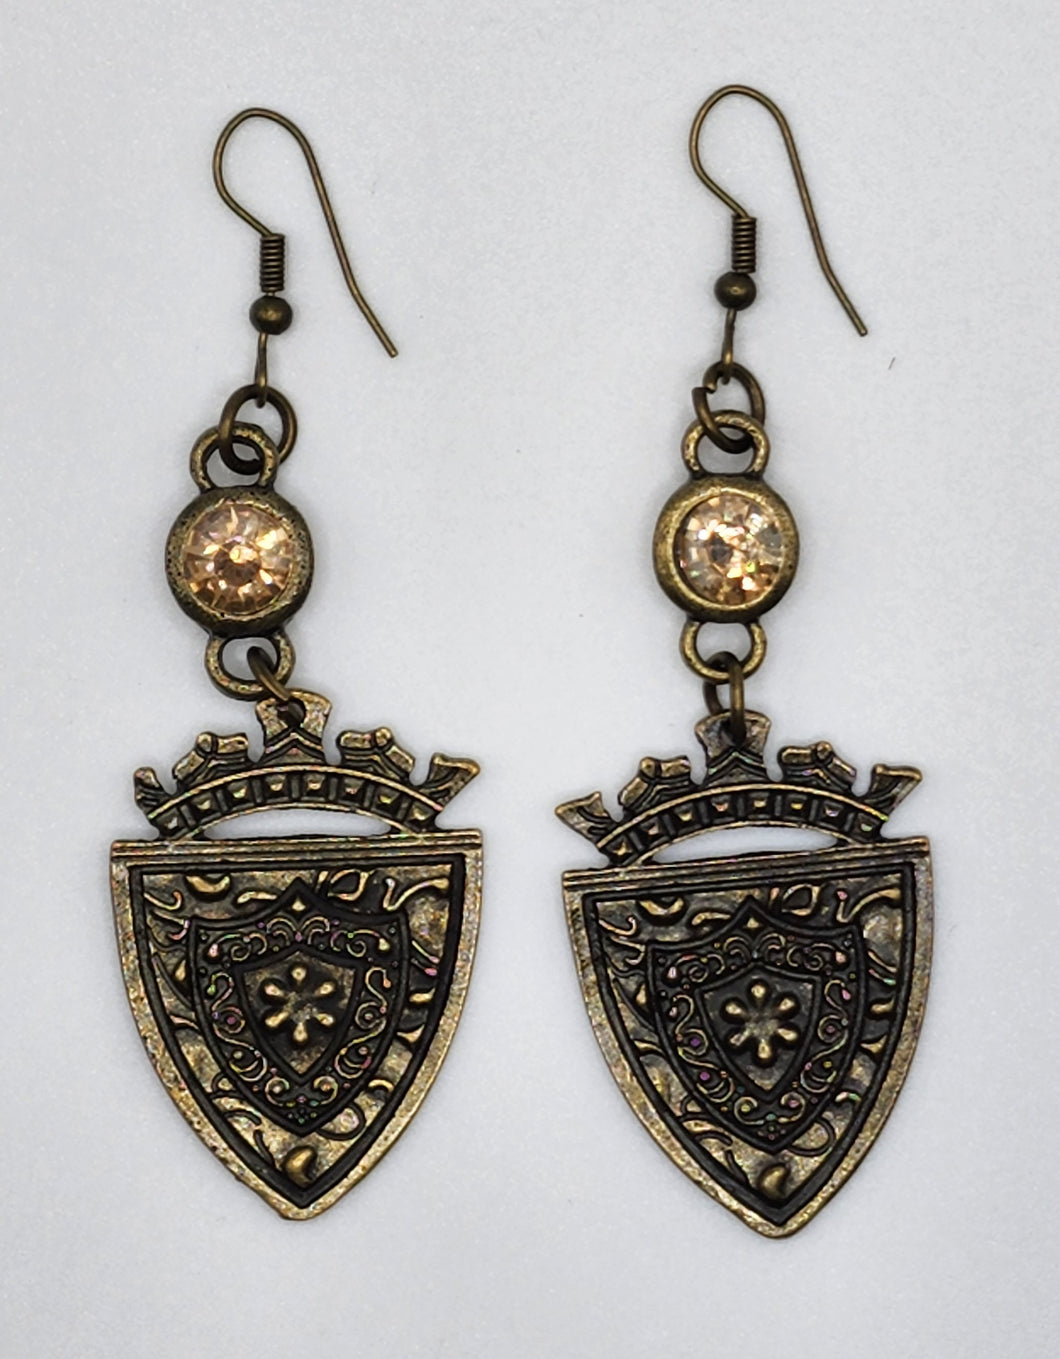 Antique Gold Earrings With Heraldic Crest-Topaz Colored Crystal Accent